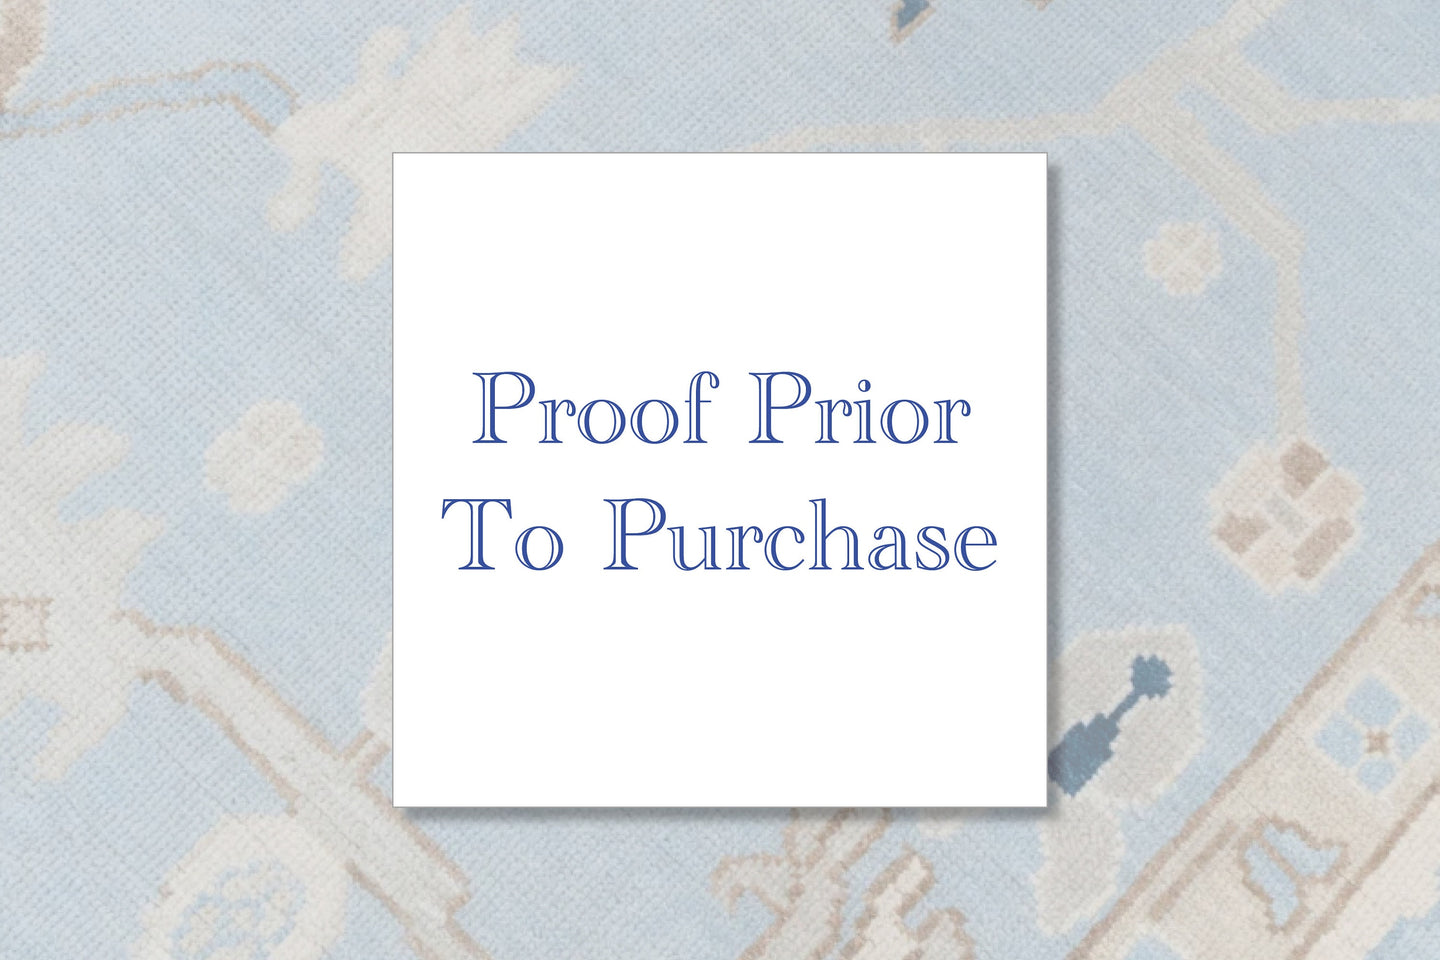 Proof Prior to Purchase